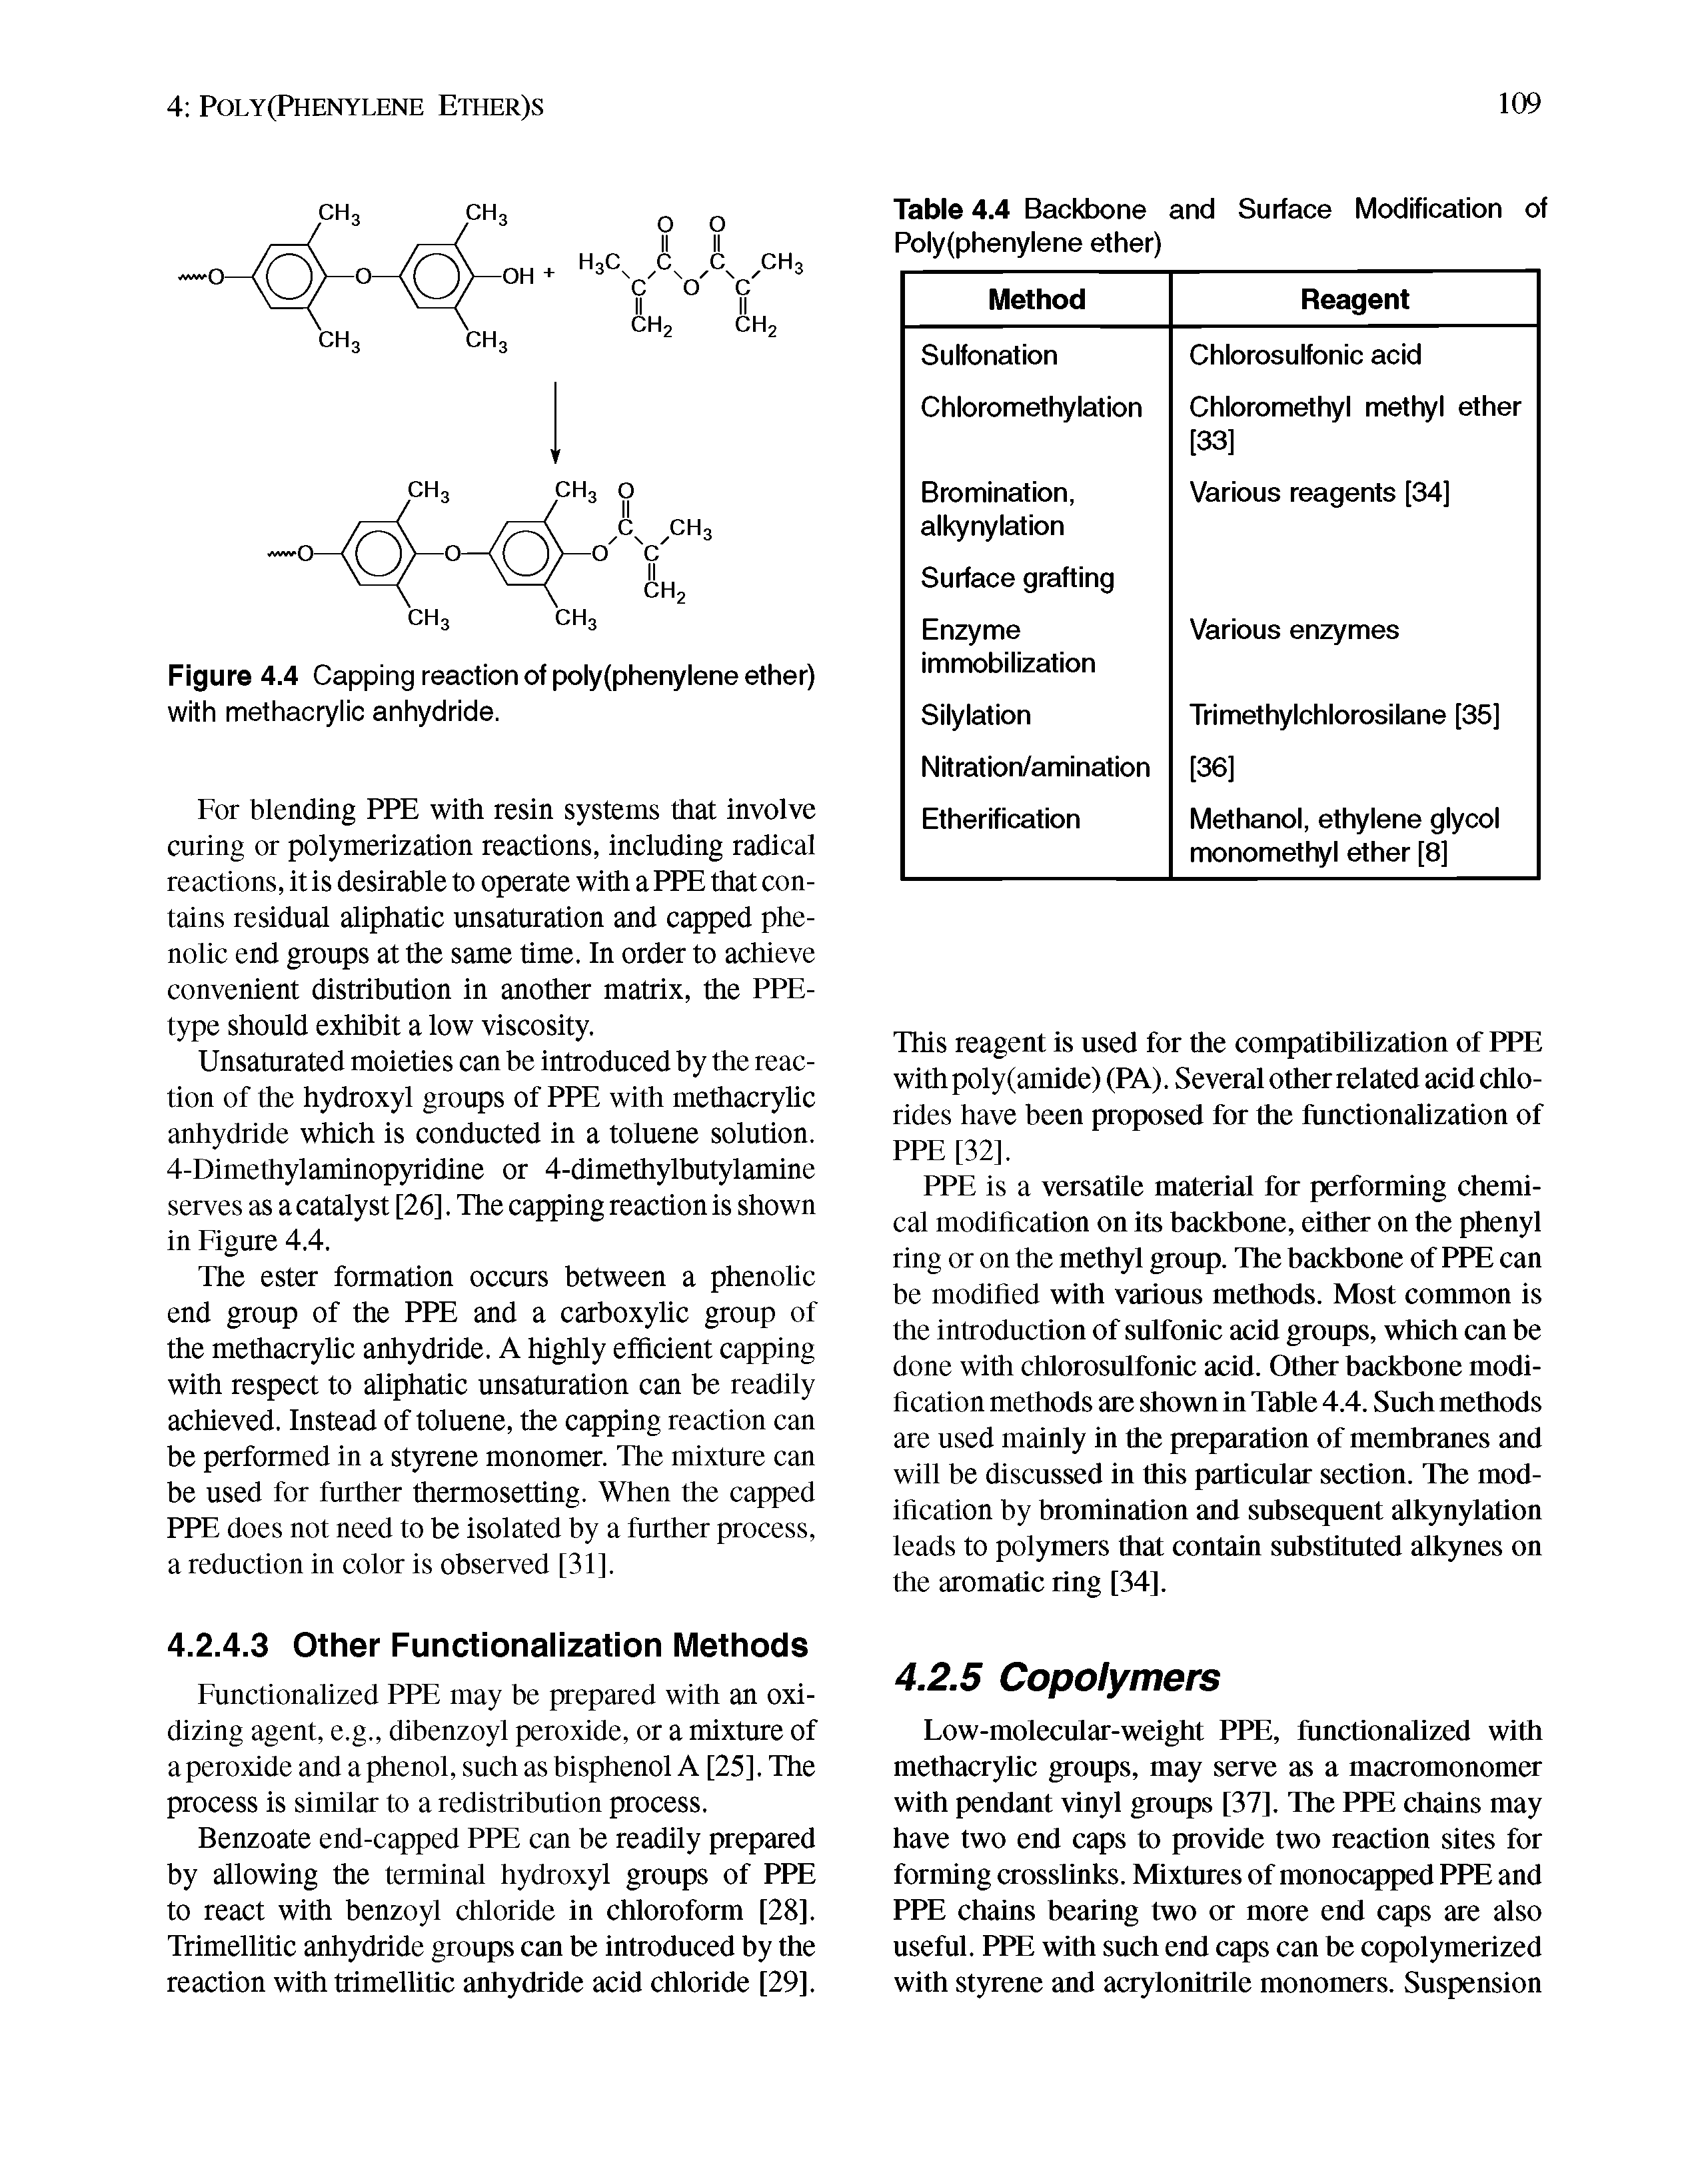 Figure 4.4 Capping reaction of poly(phenylene ether) with methacrylic anhydride.